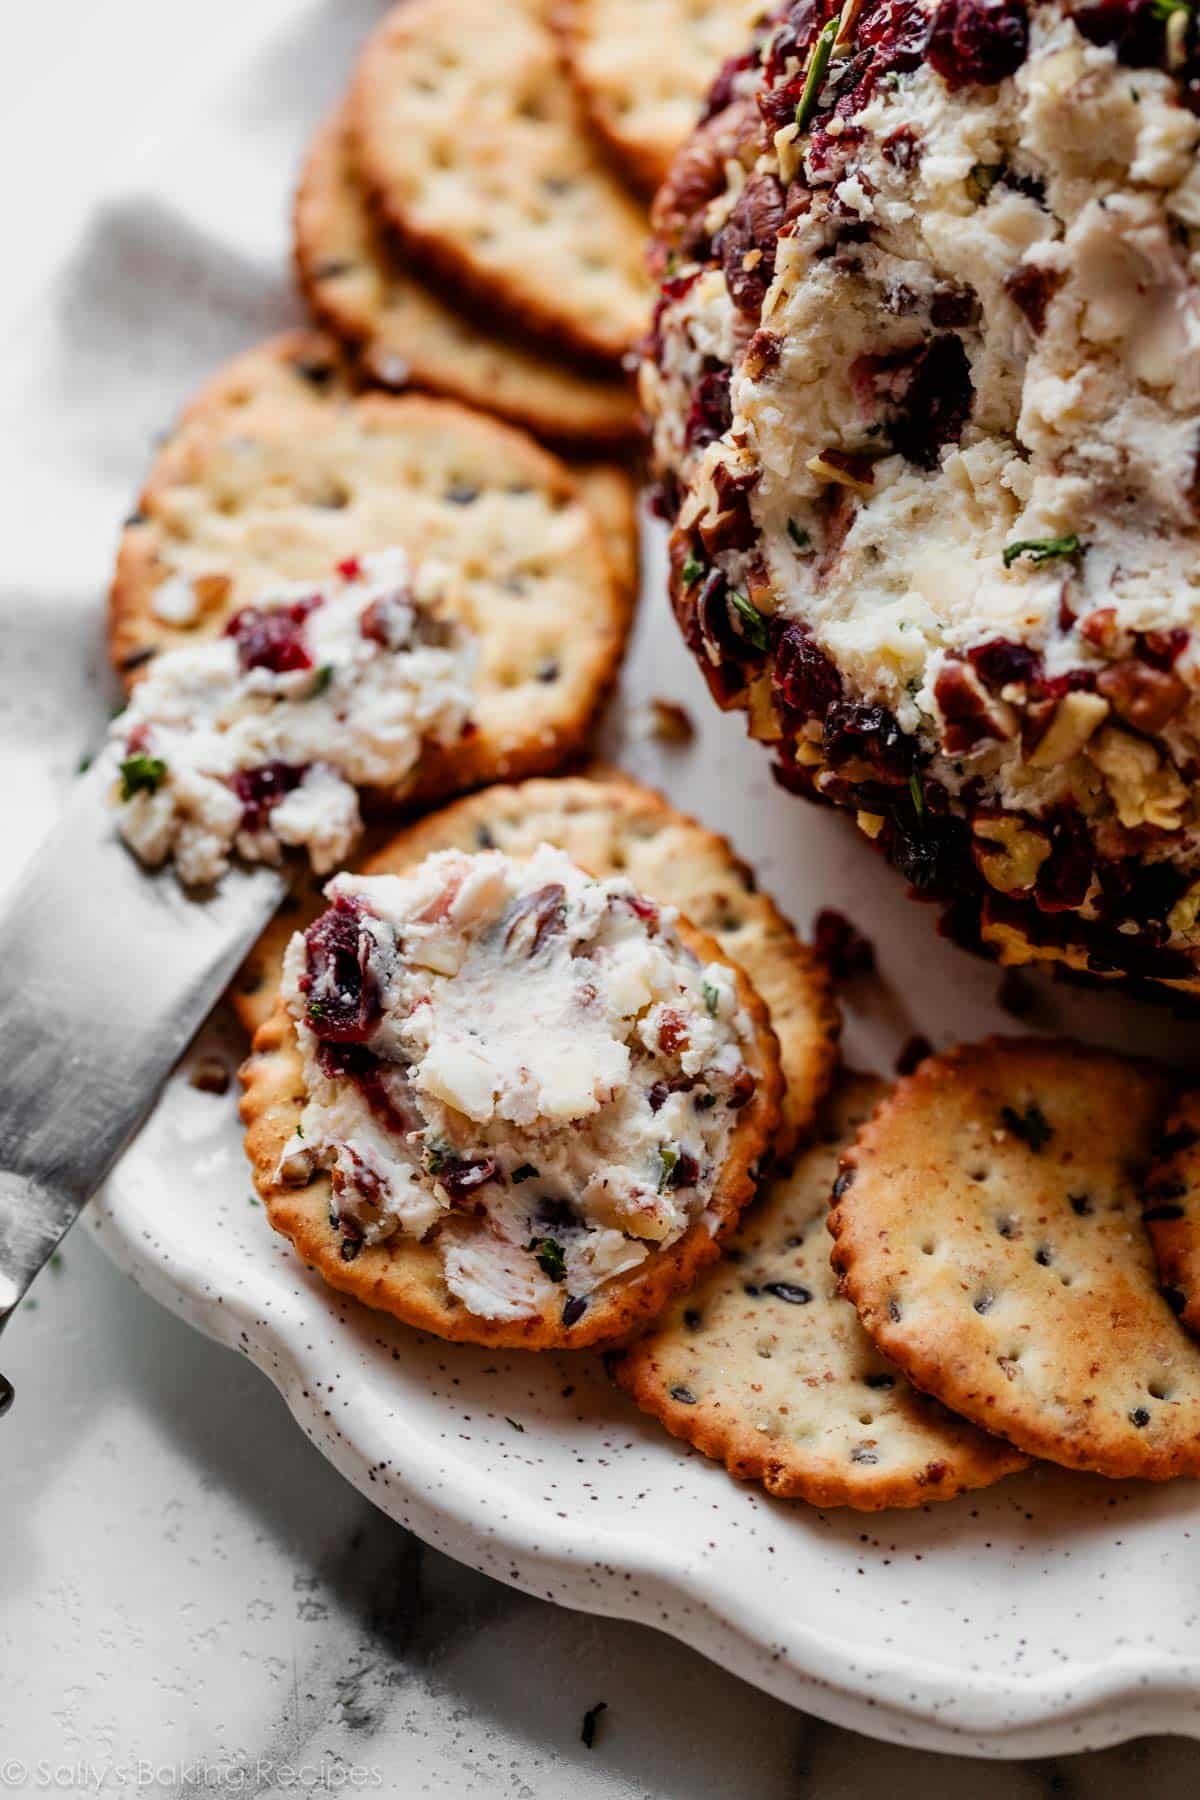 cranberry cheese spread on cracker on plate.